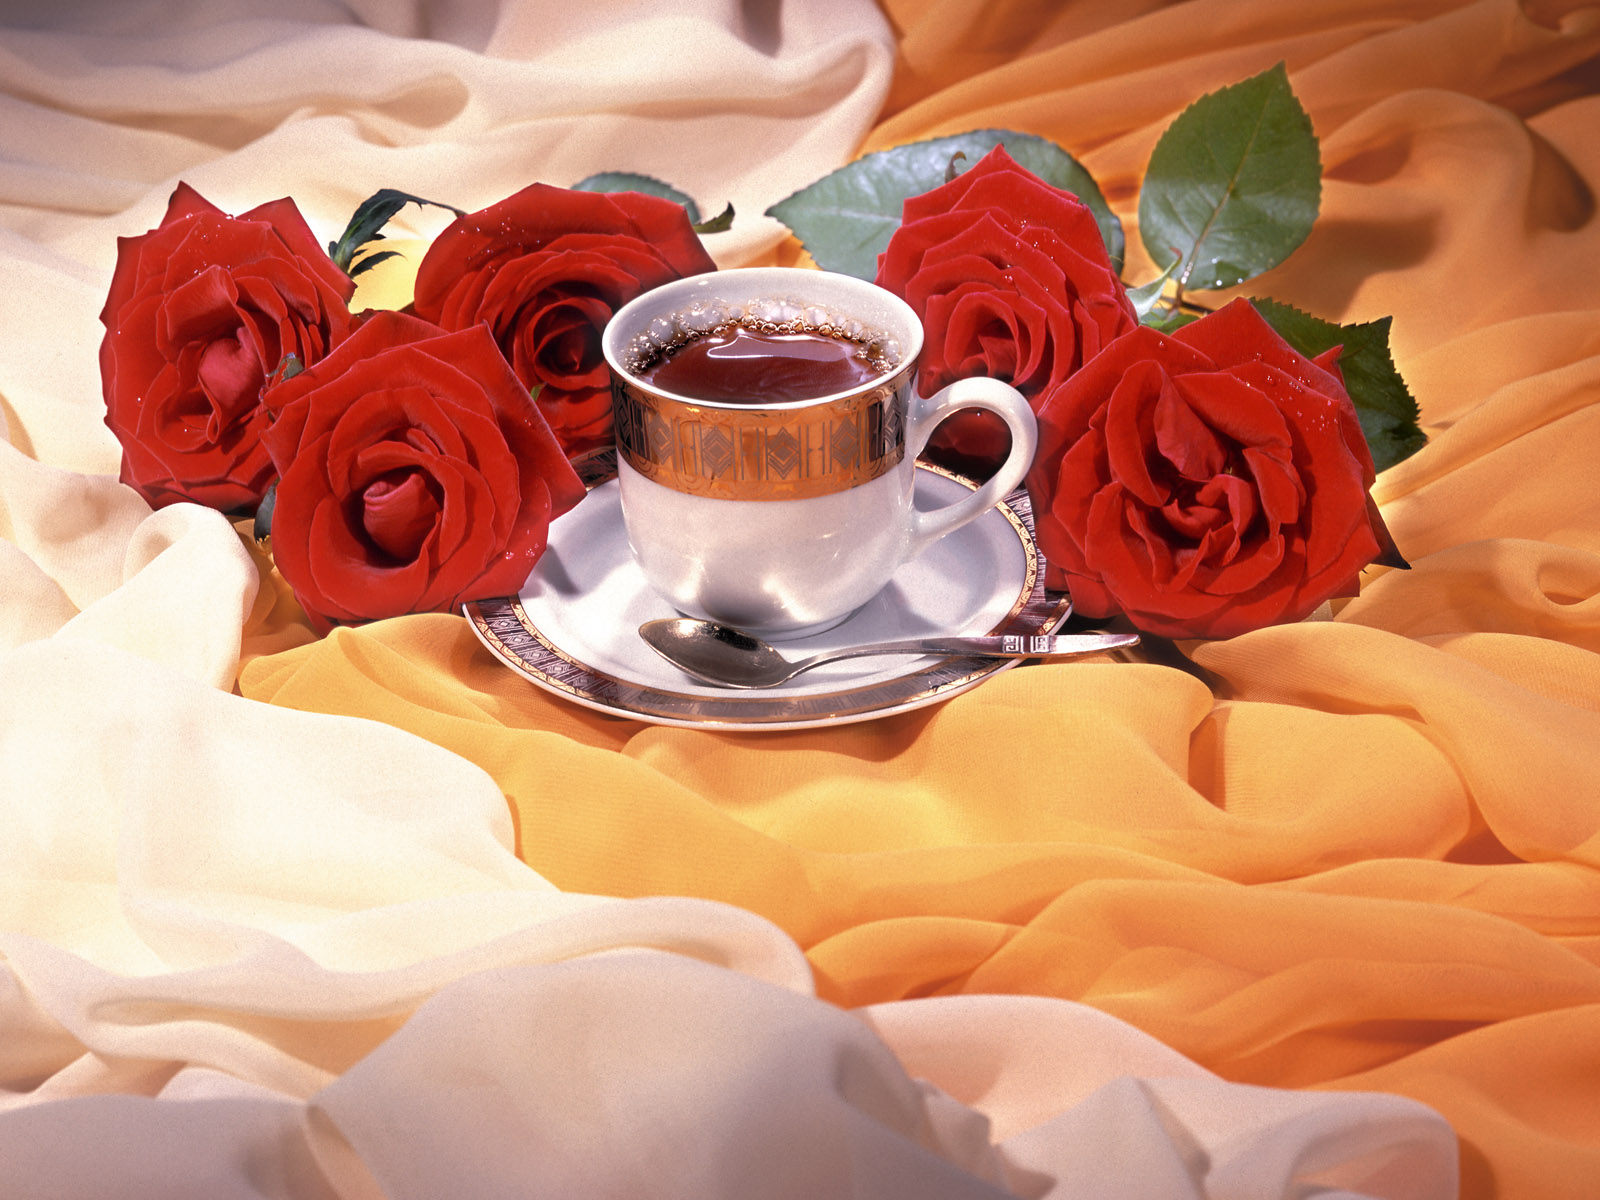 Hot Tea and Roses